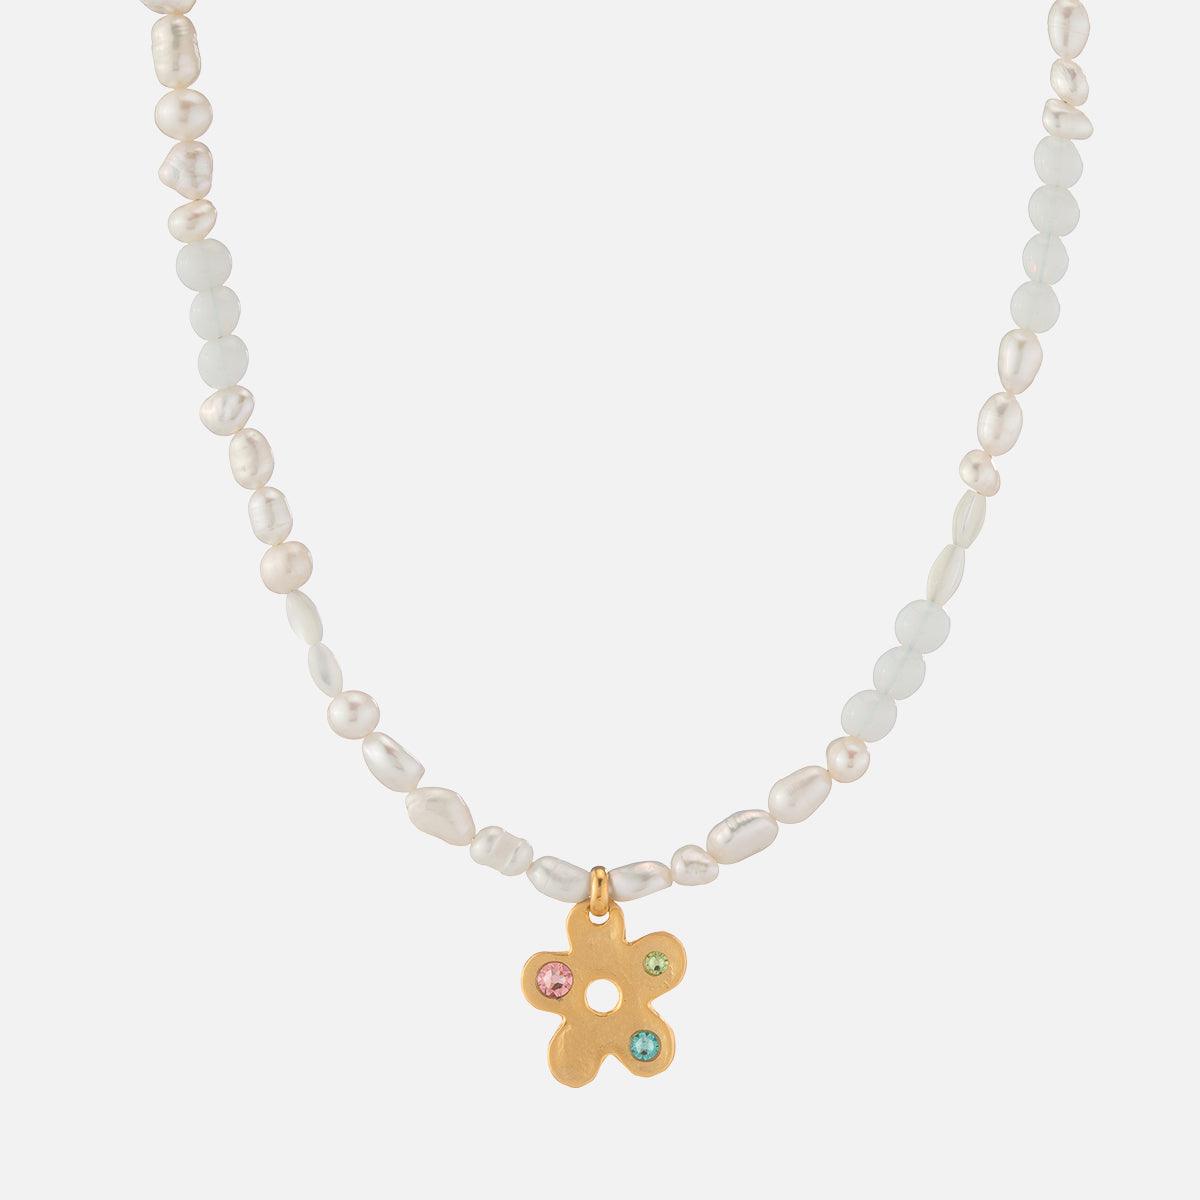 Flower Pow Pow Pearly Necklace - At Present